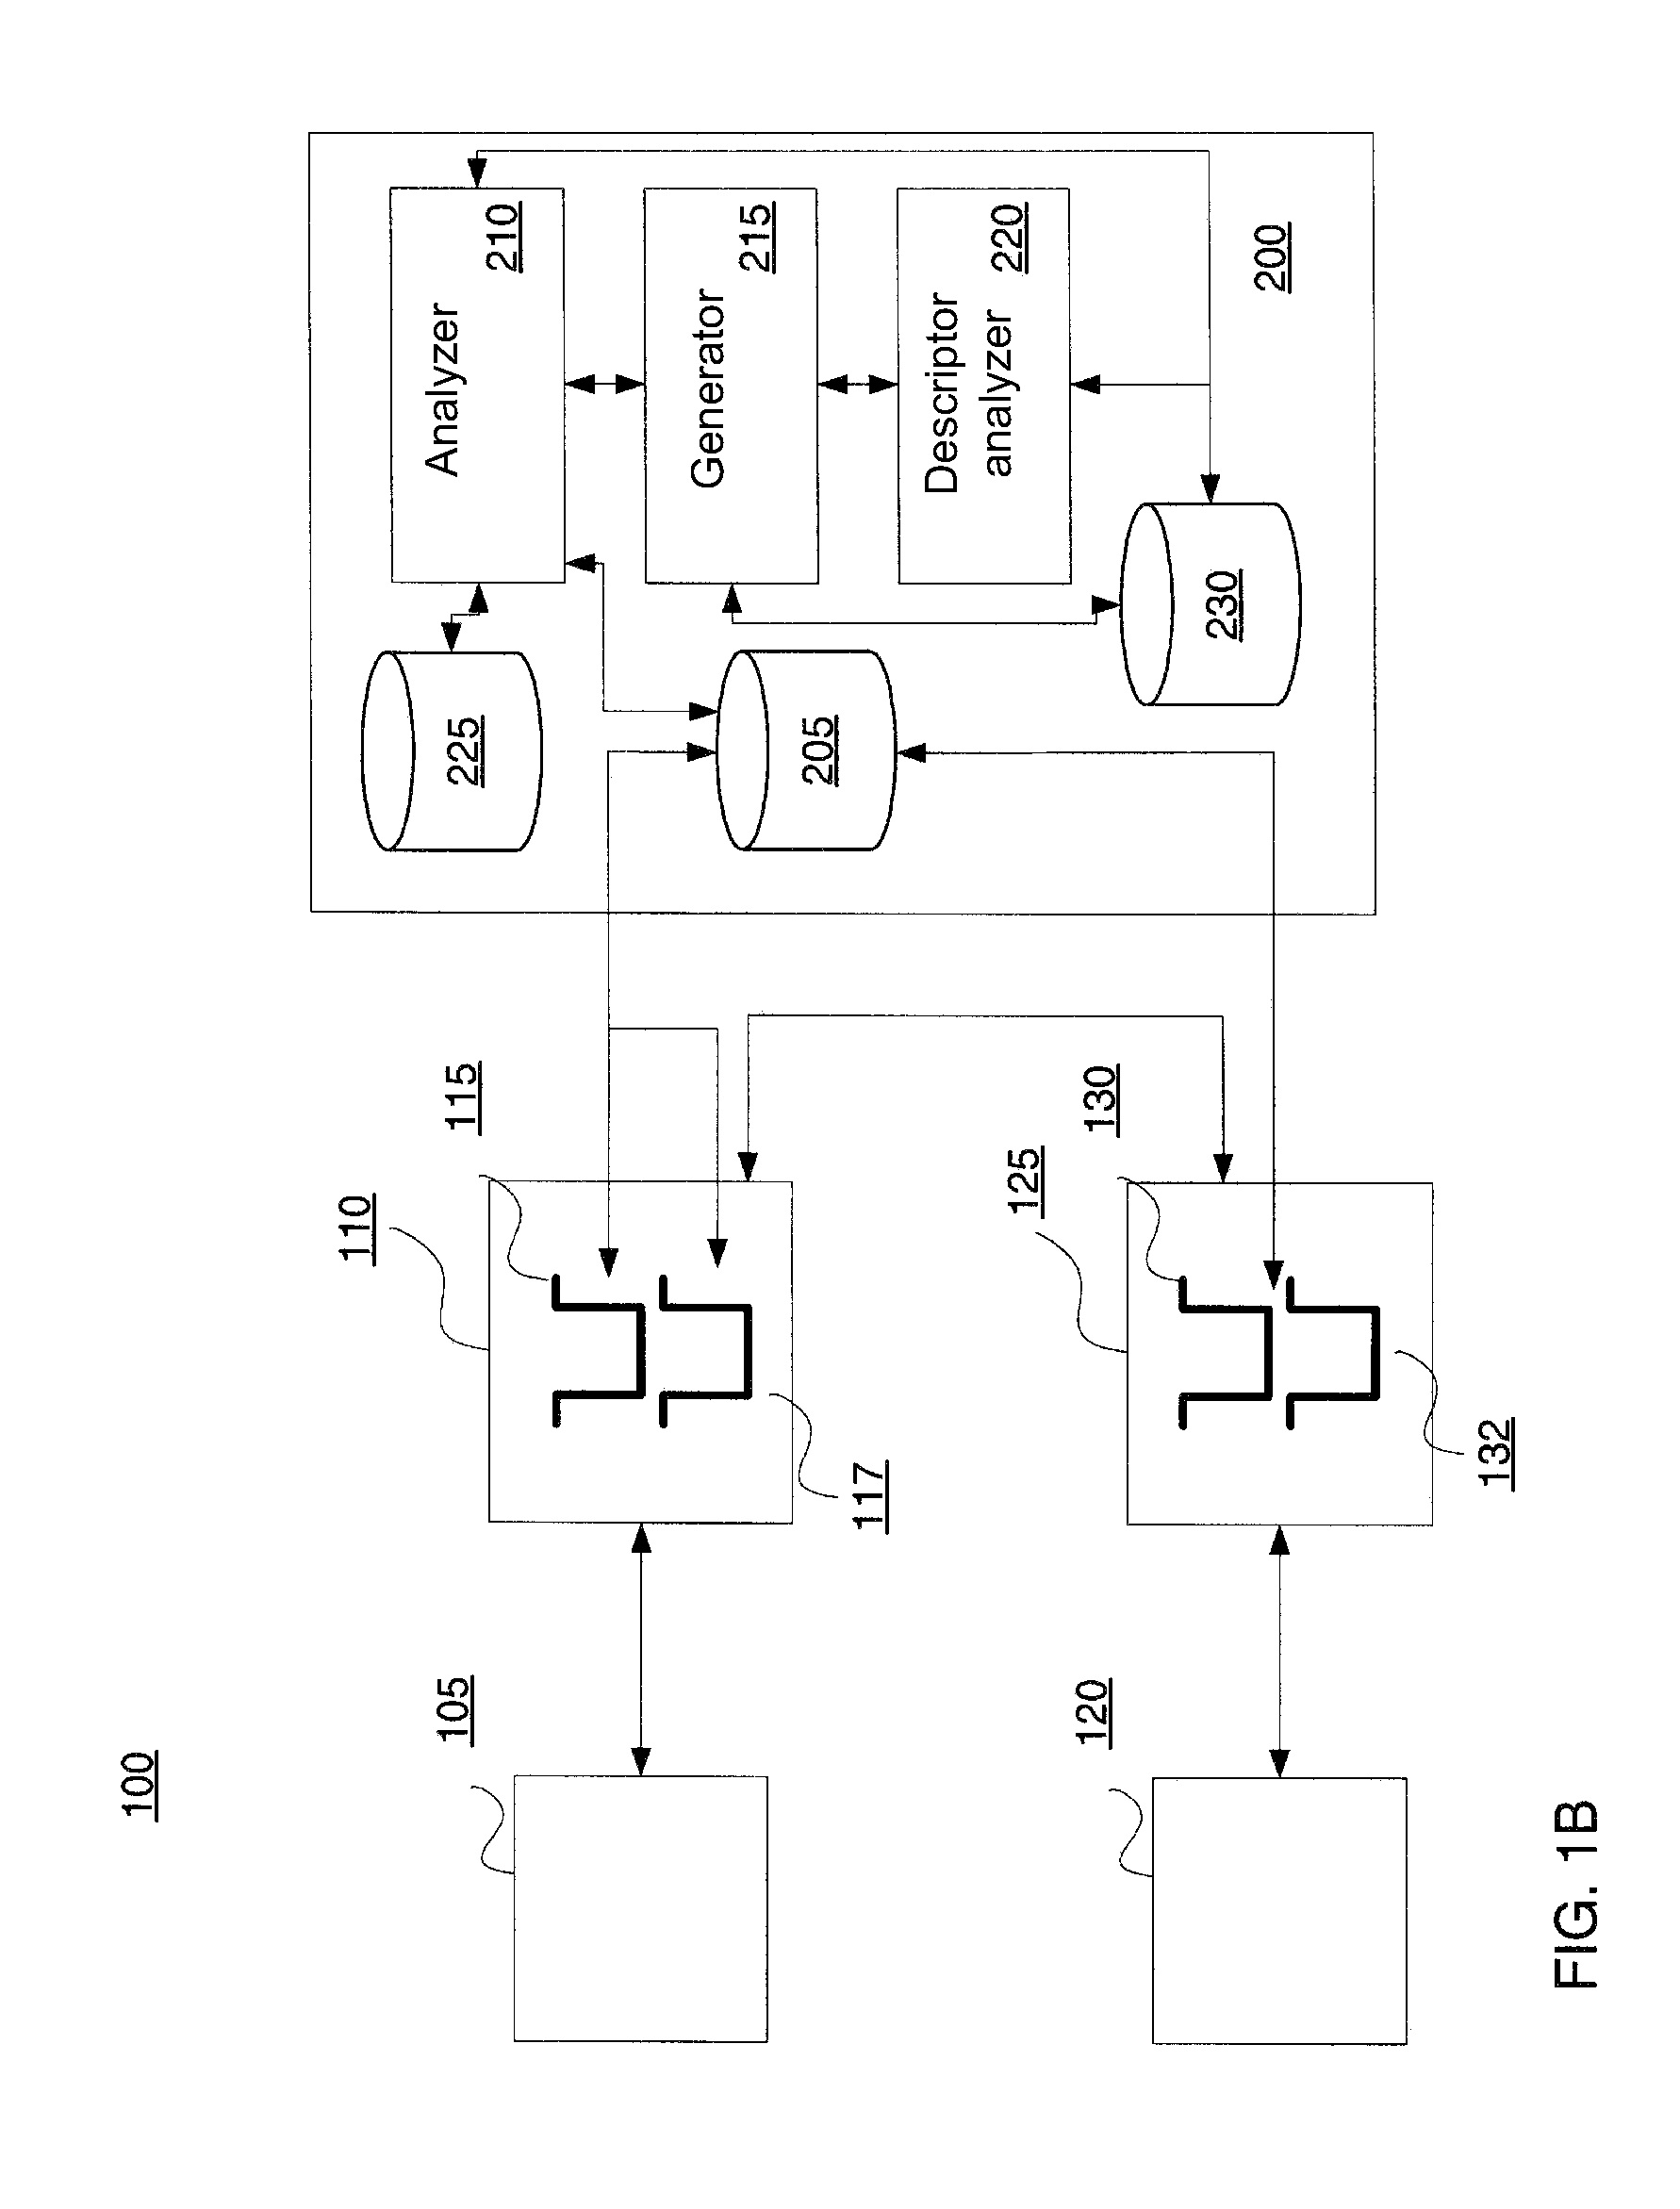 Method for Determining Relationship Data Associated with Application Programs